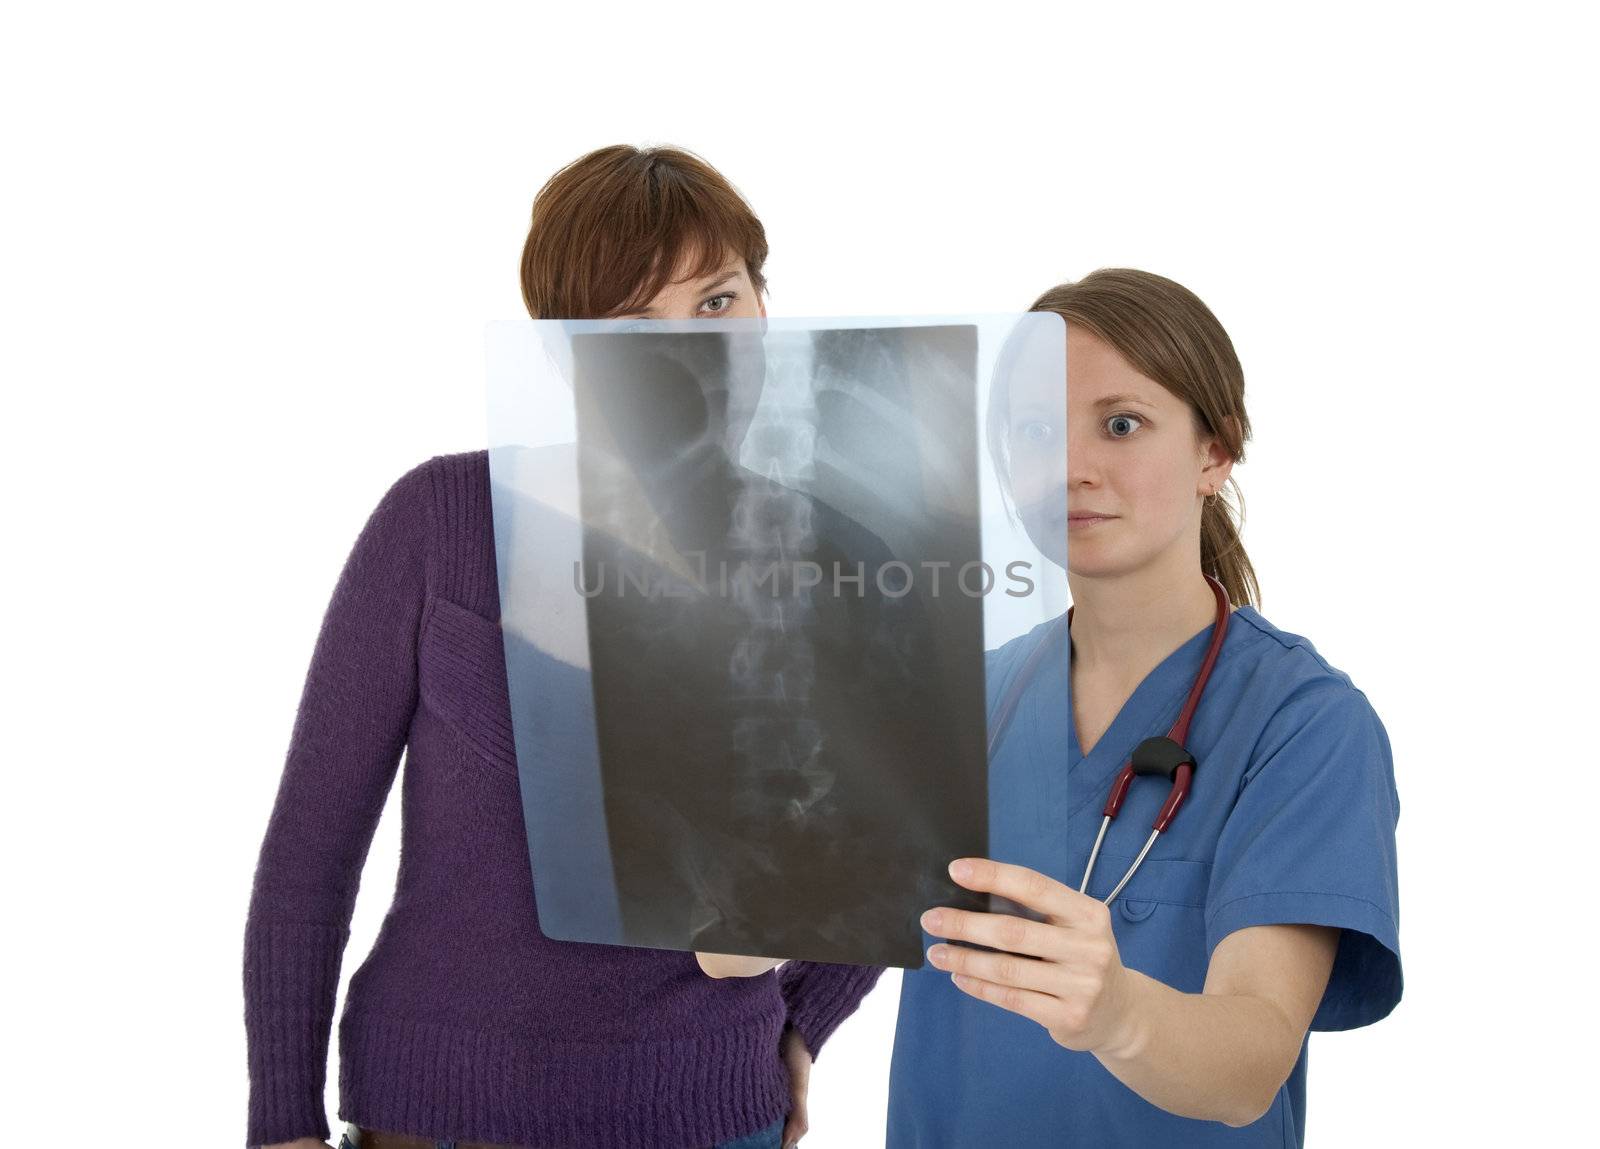 Nurse and patient looking at x-ray with worried expression by anikasalsera